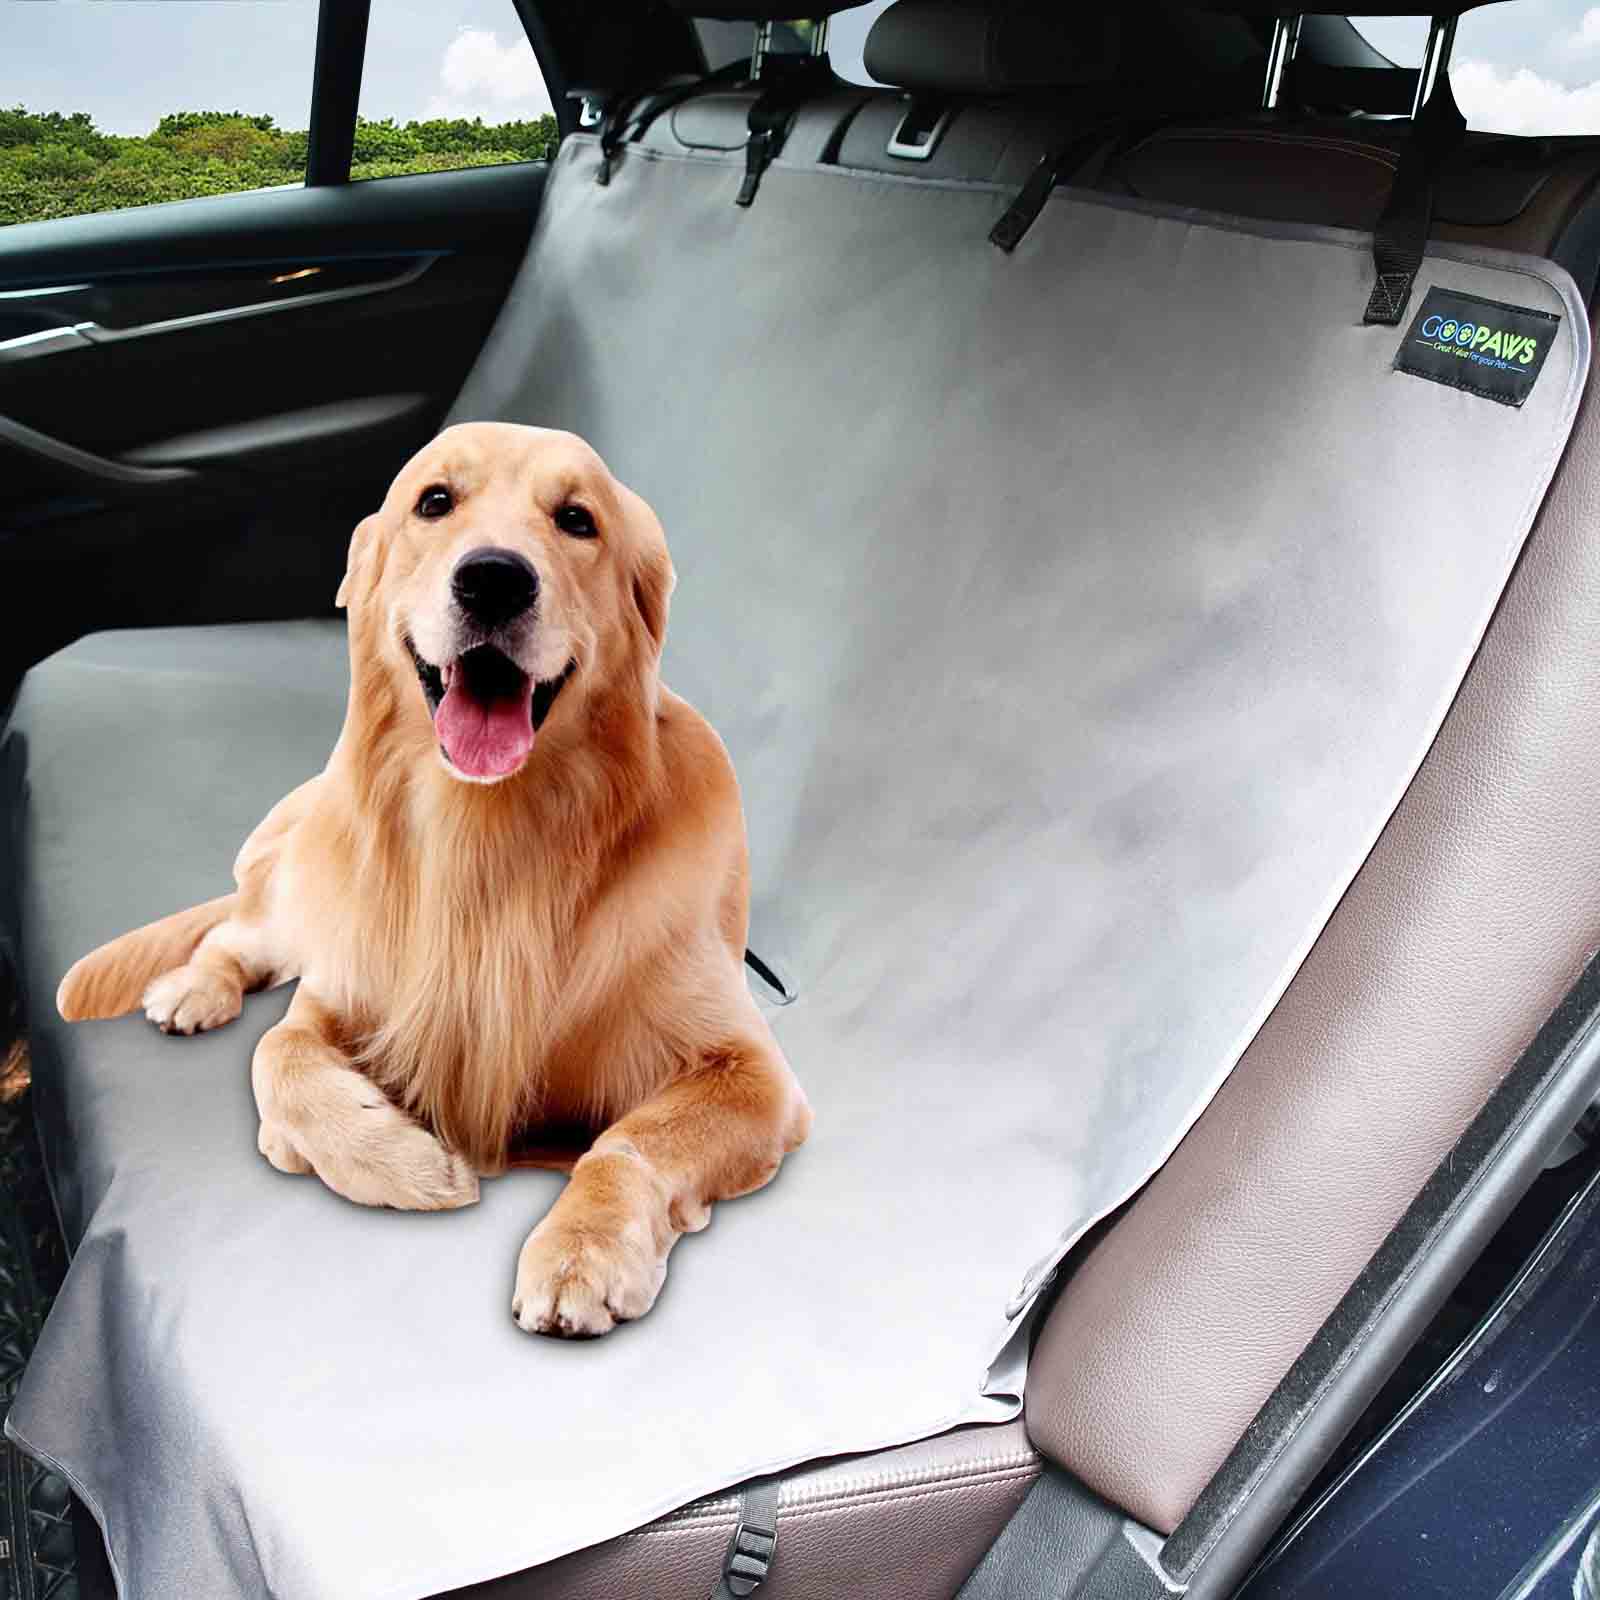 GOOPAWS Scratchproof Bench Dog Car Seat Cover, Fits for Car SUV Truck